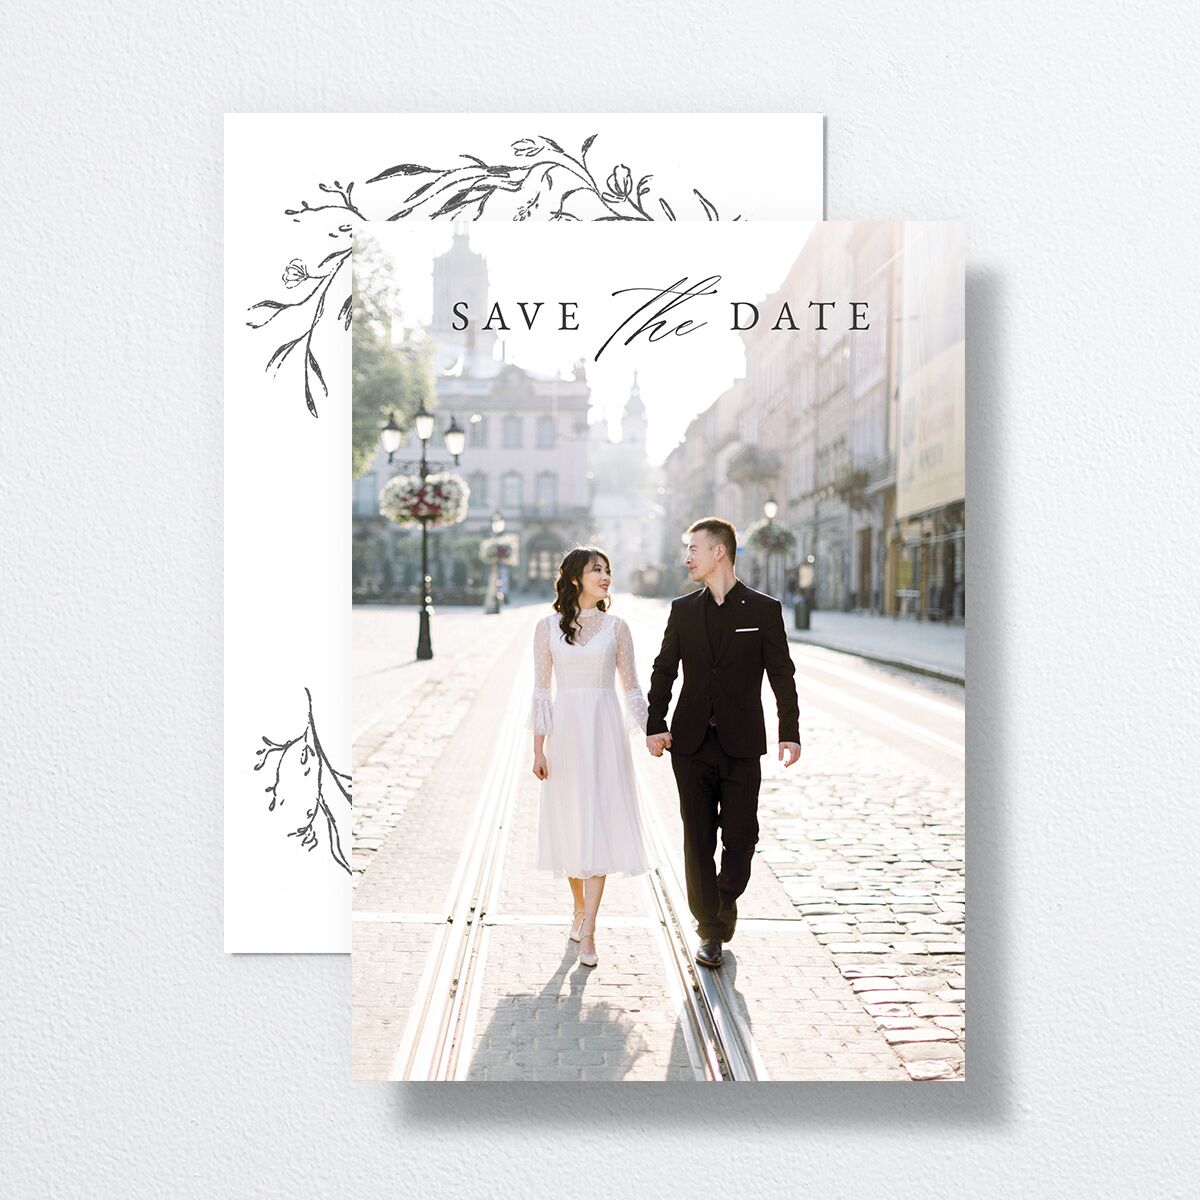 Illustrated Vines Save The Date Cards front-and-back in grey